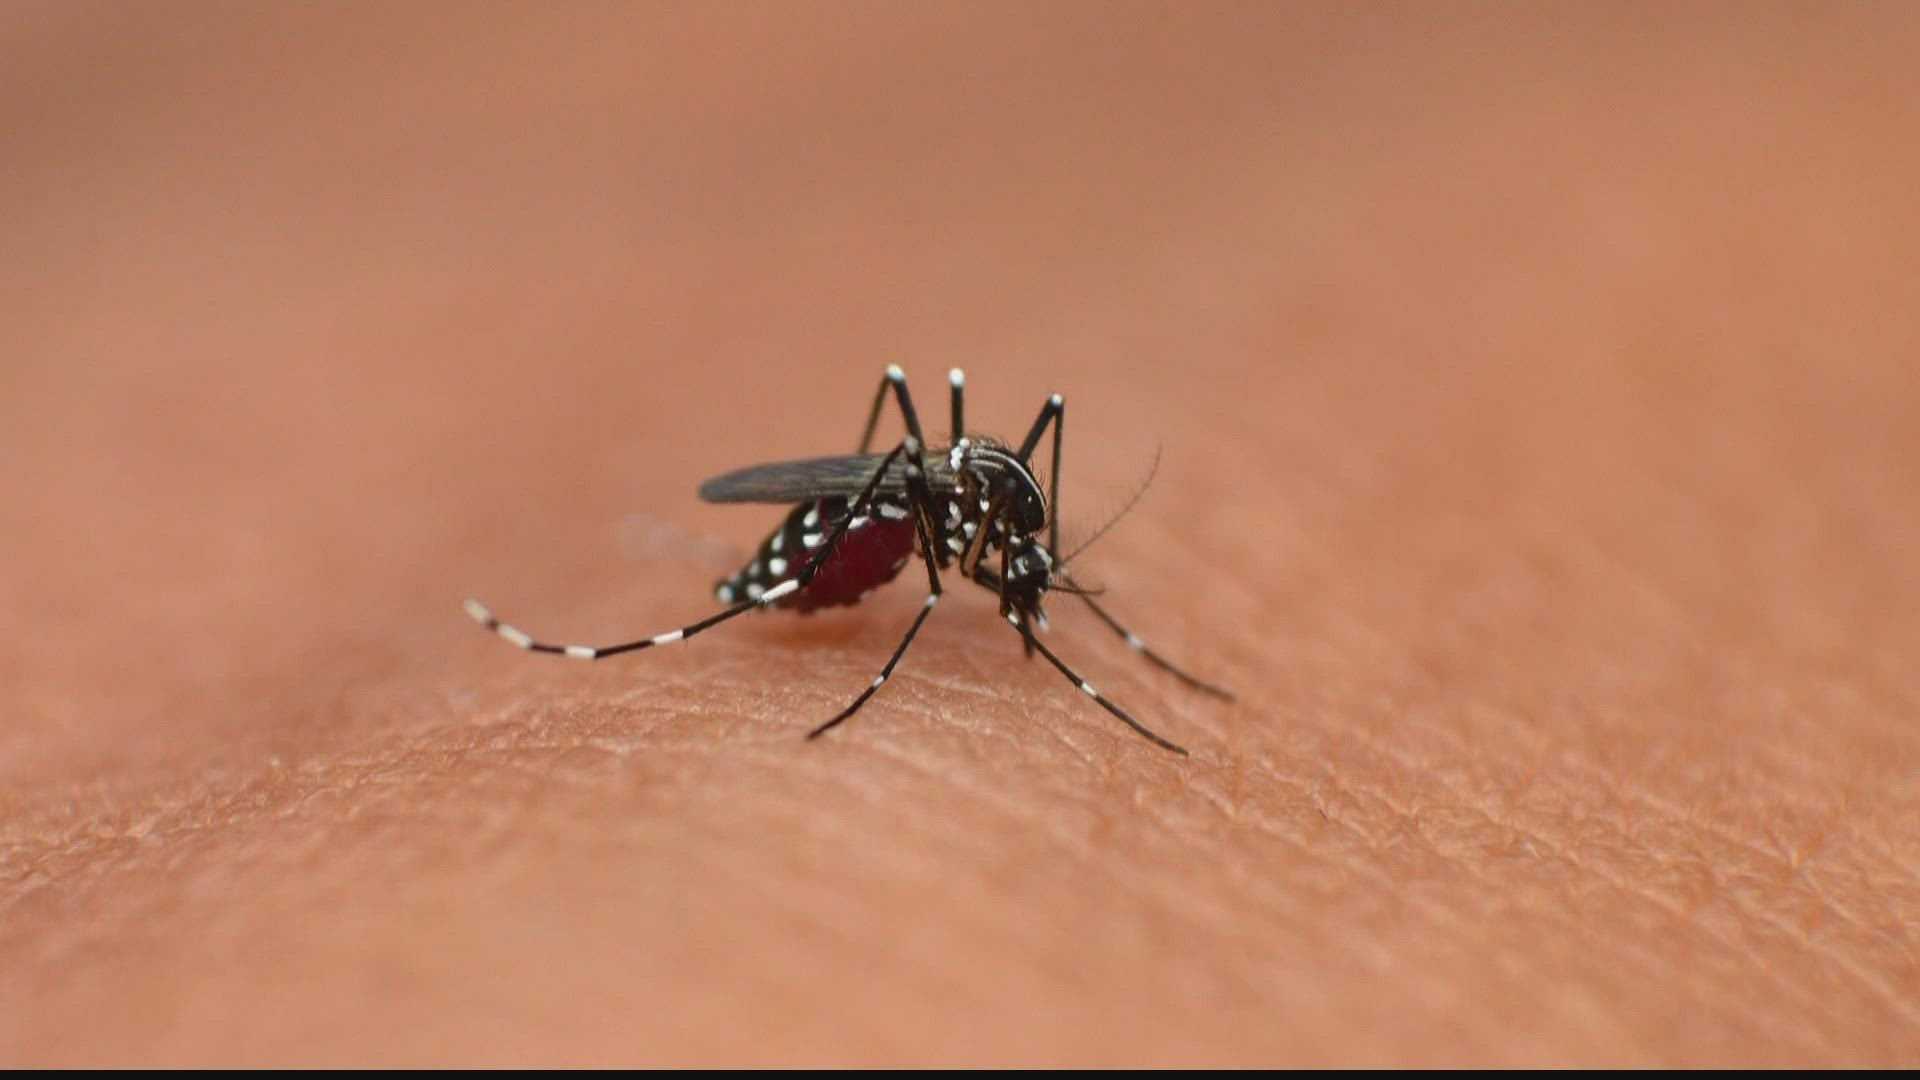 Four mosquito traps tested positive for the virus, county health leaders said.